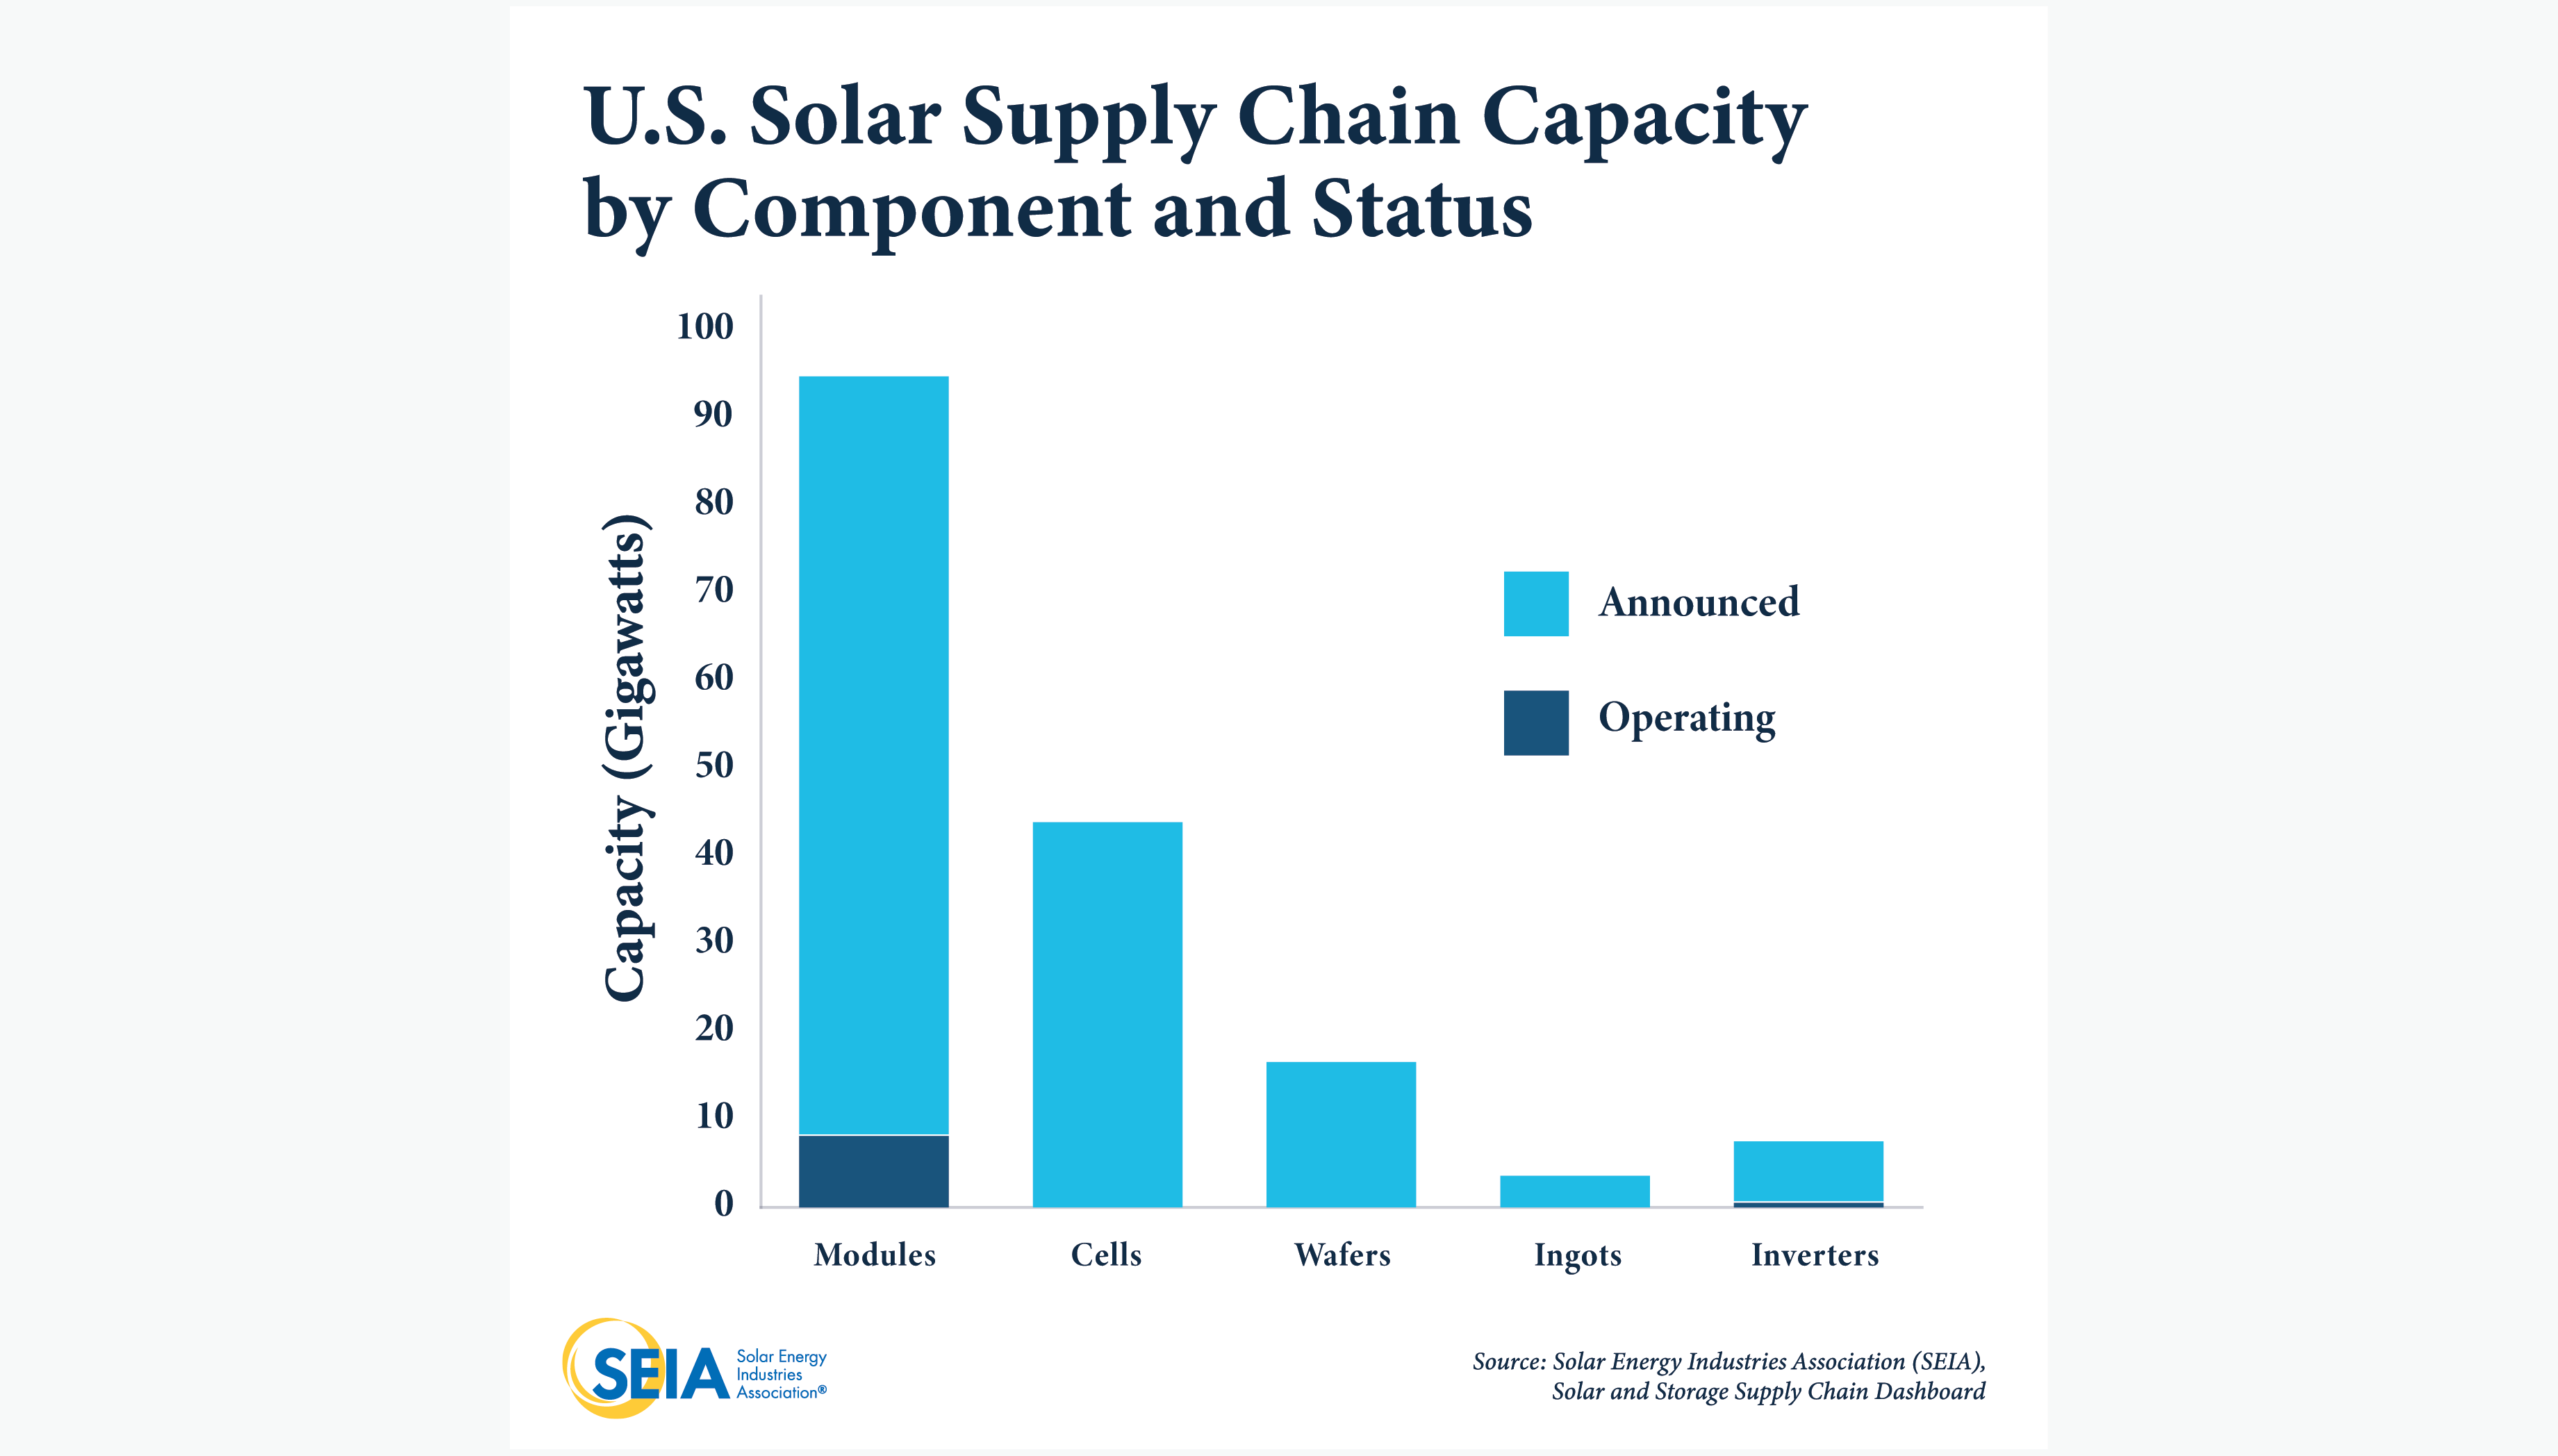 u.s. solar supply chain capacity by component and status